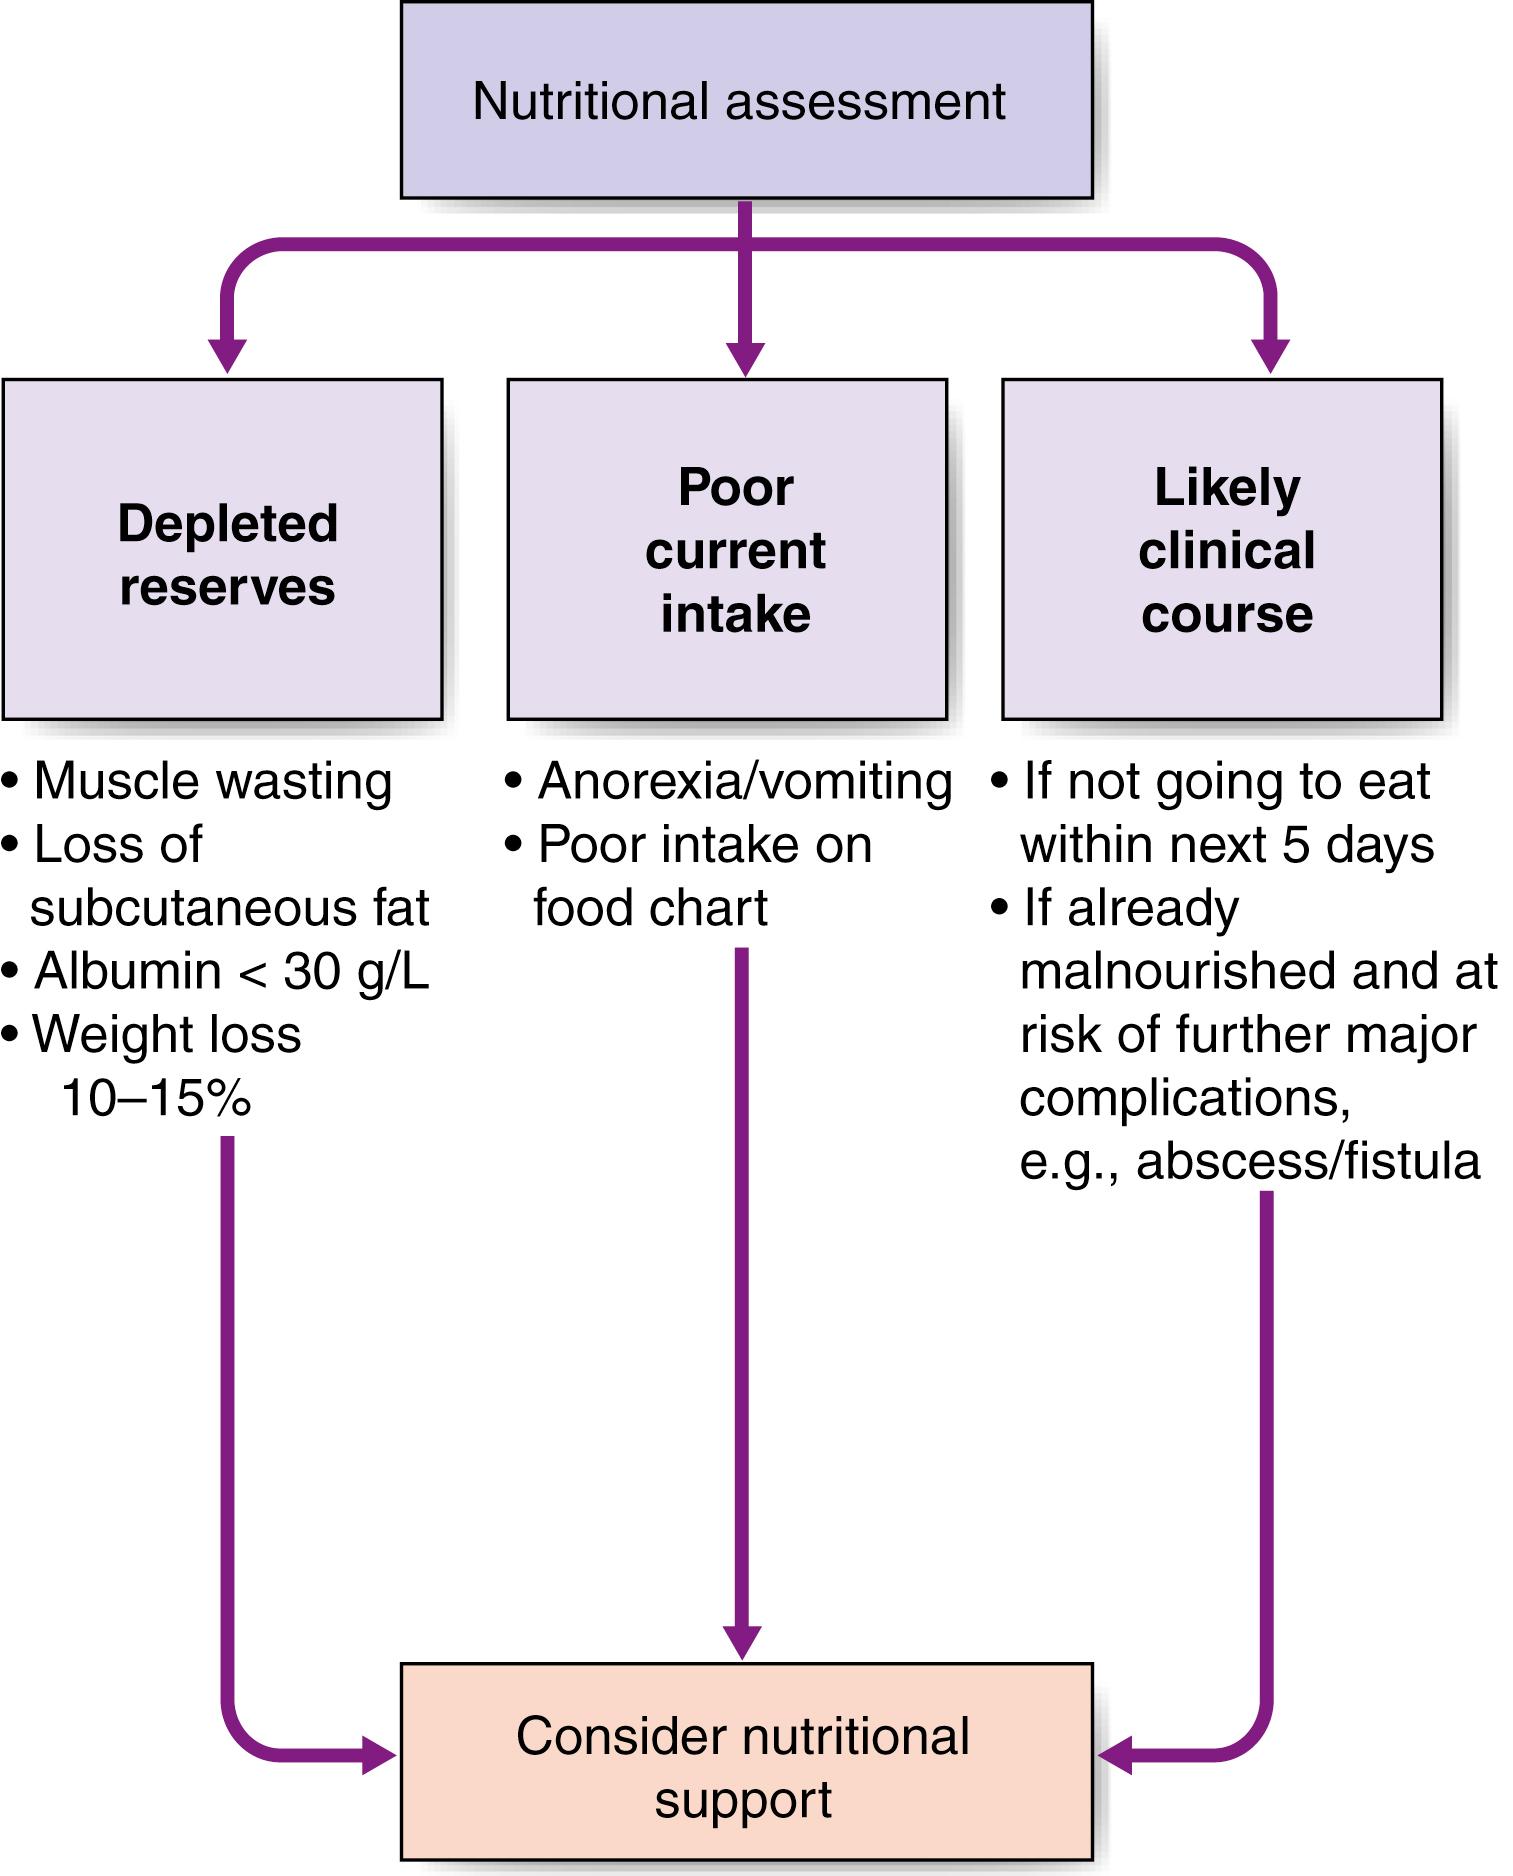 Fig. 5.2, Nutritional assessment in surgical patients.